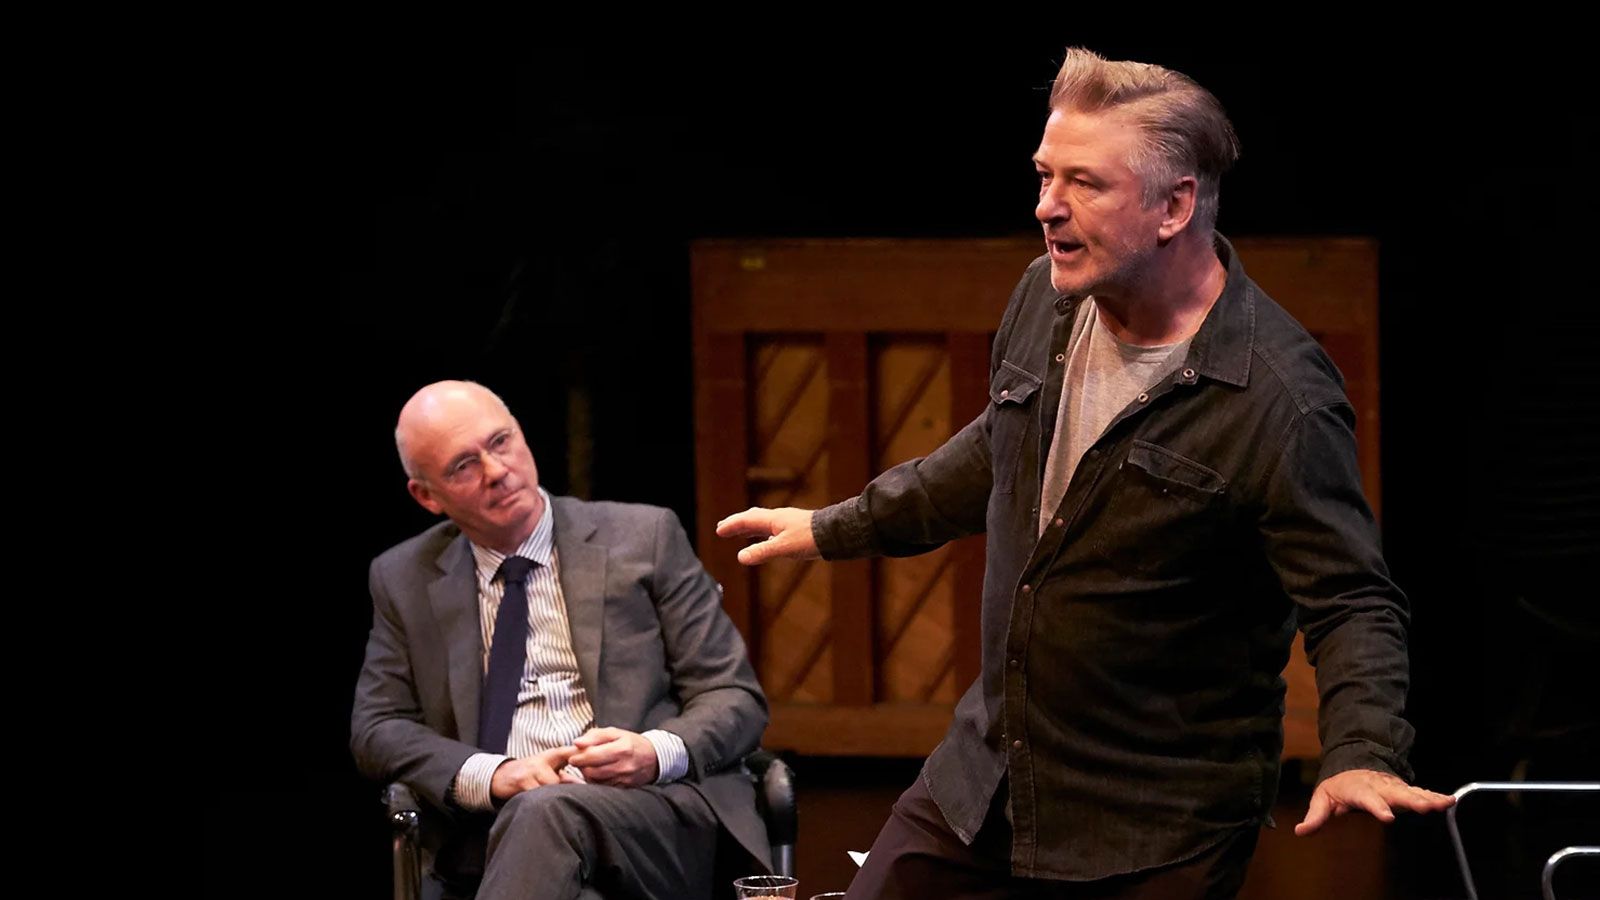 Alec Baldwin on stage at Hunter for Visiting Artists series